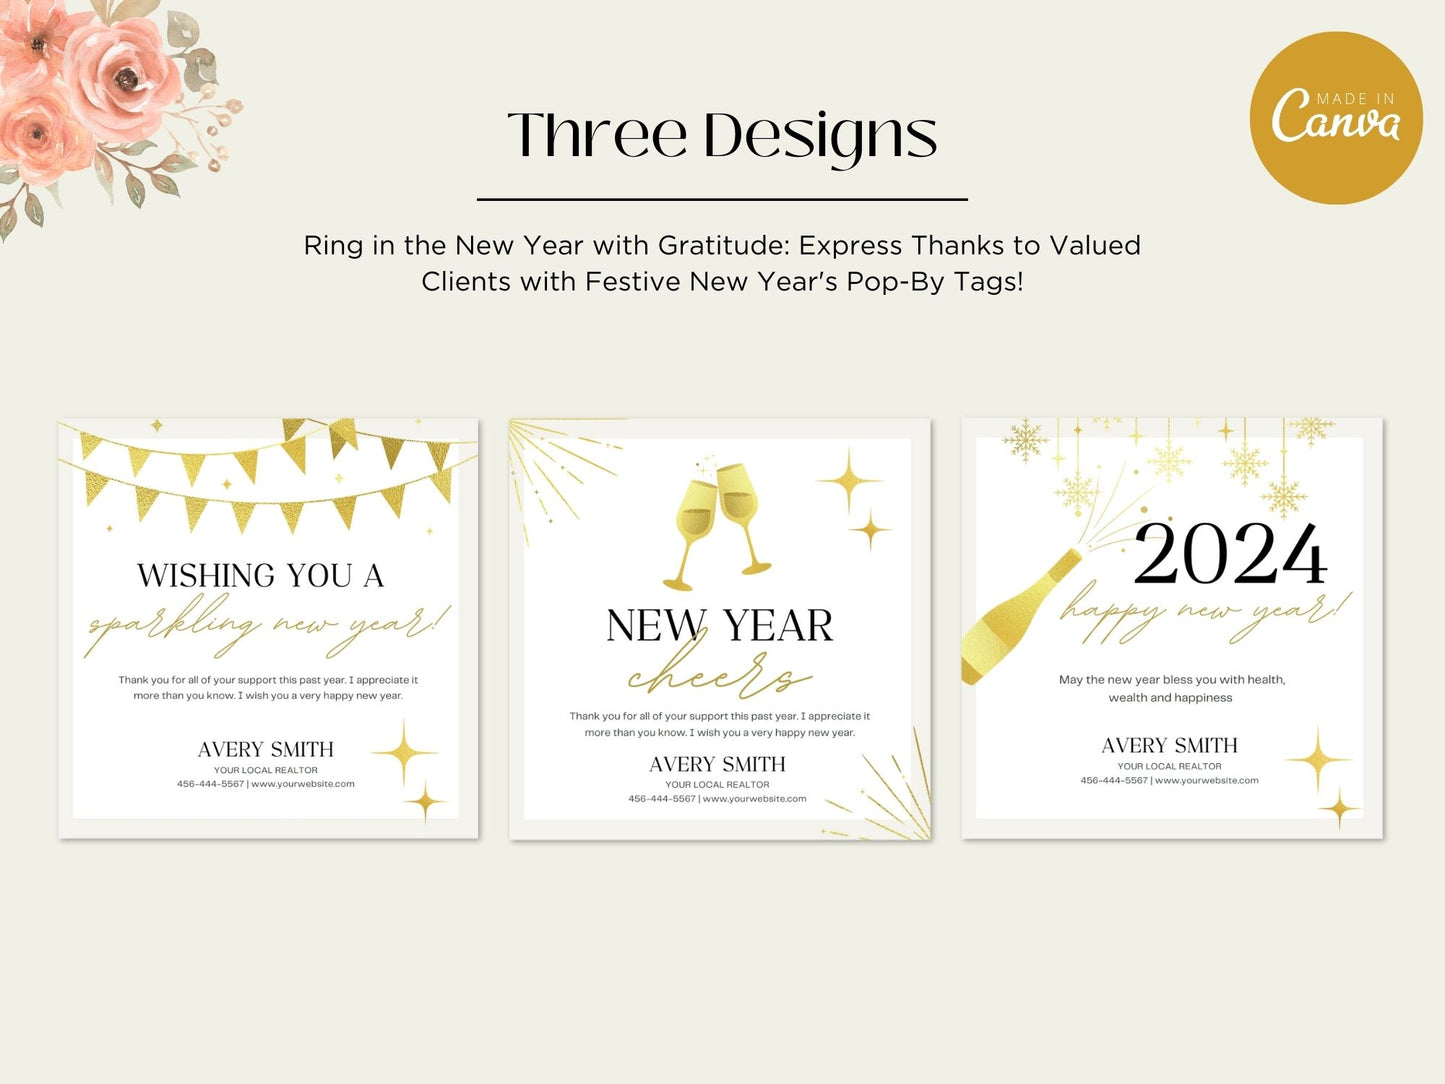 Real Estate New Year Pop By Tags Bundle - SQUARE: Spreading Festive New Year Cheer to Clients and the Community